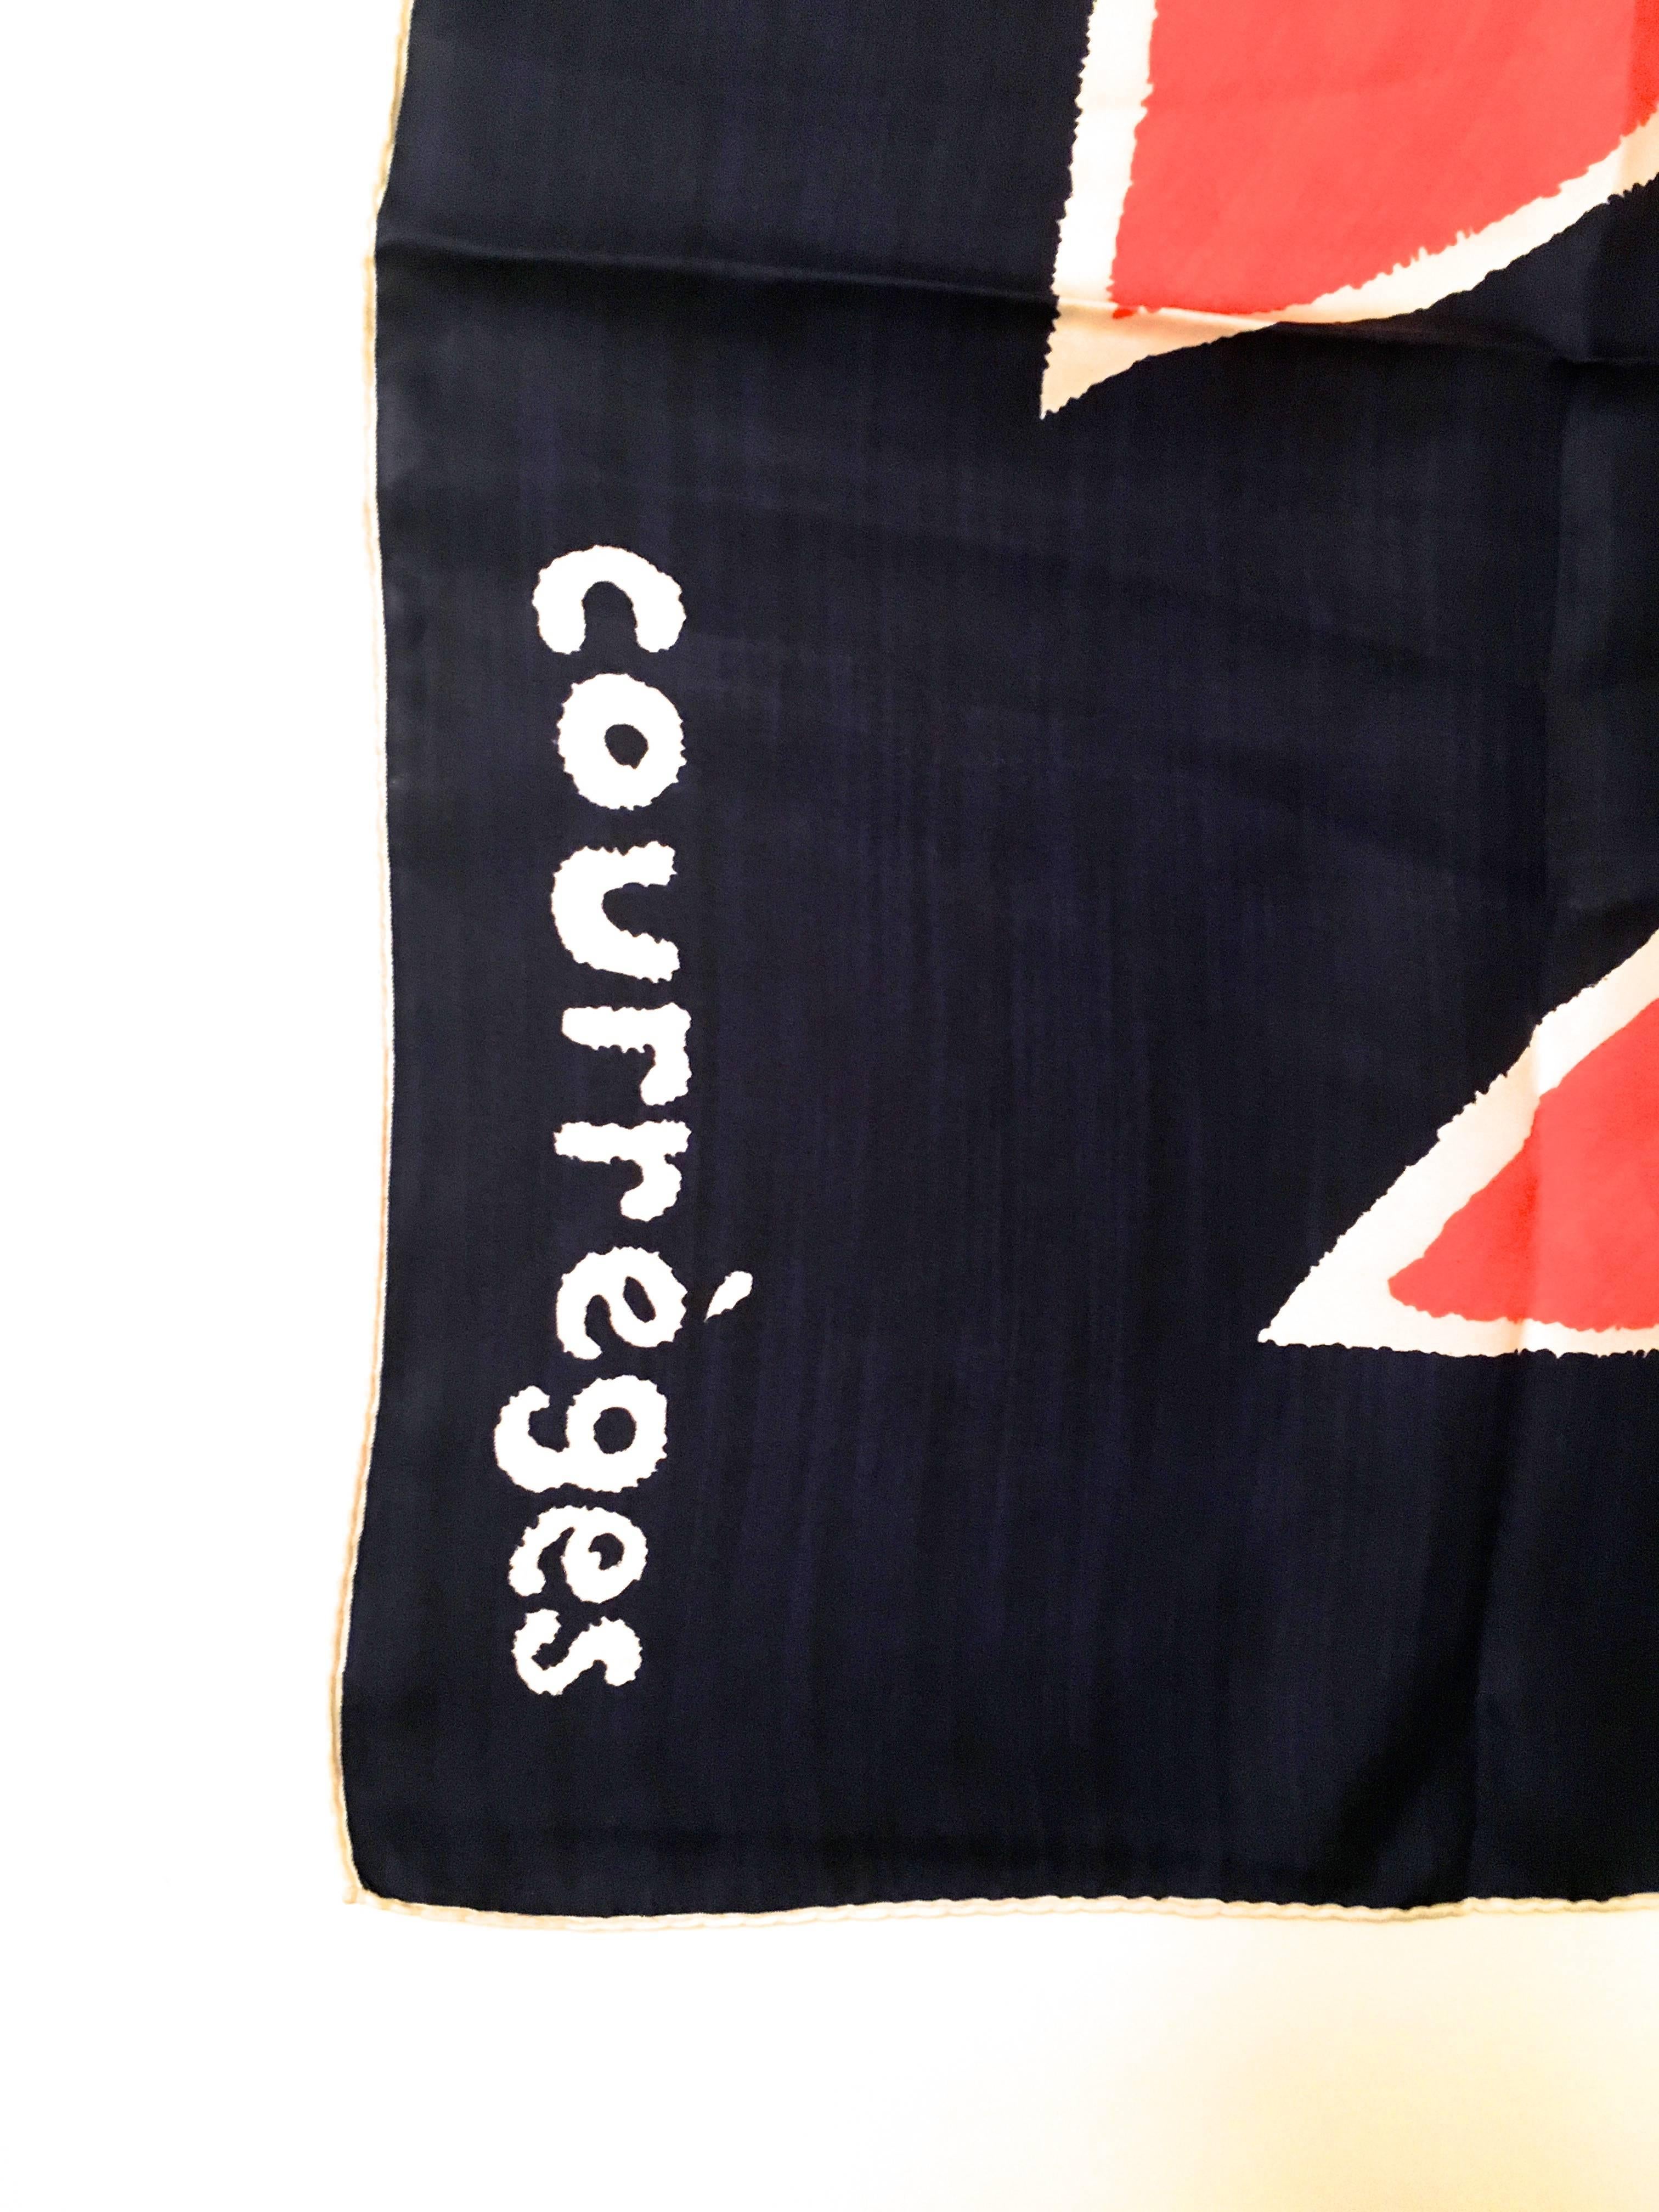 Presented here is a beautiful scarf from Courreges. This beautiful silk scarf is comprised of an abstract design of varying shapes in orange against a solid blue background. The scarf is signed Courreges Paris in the design with the iconic Courreges